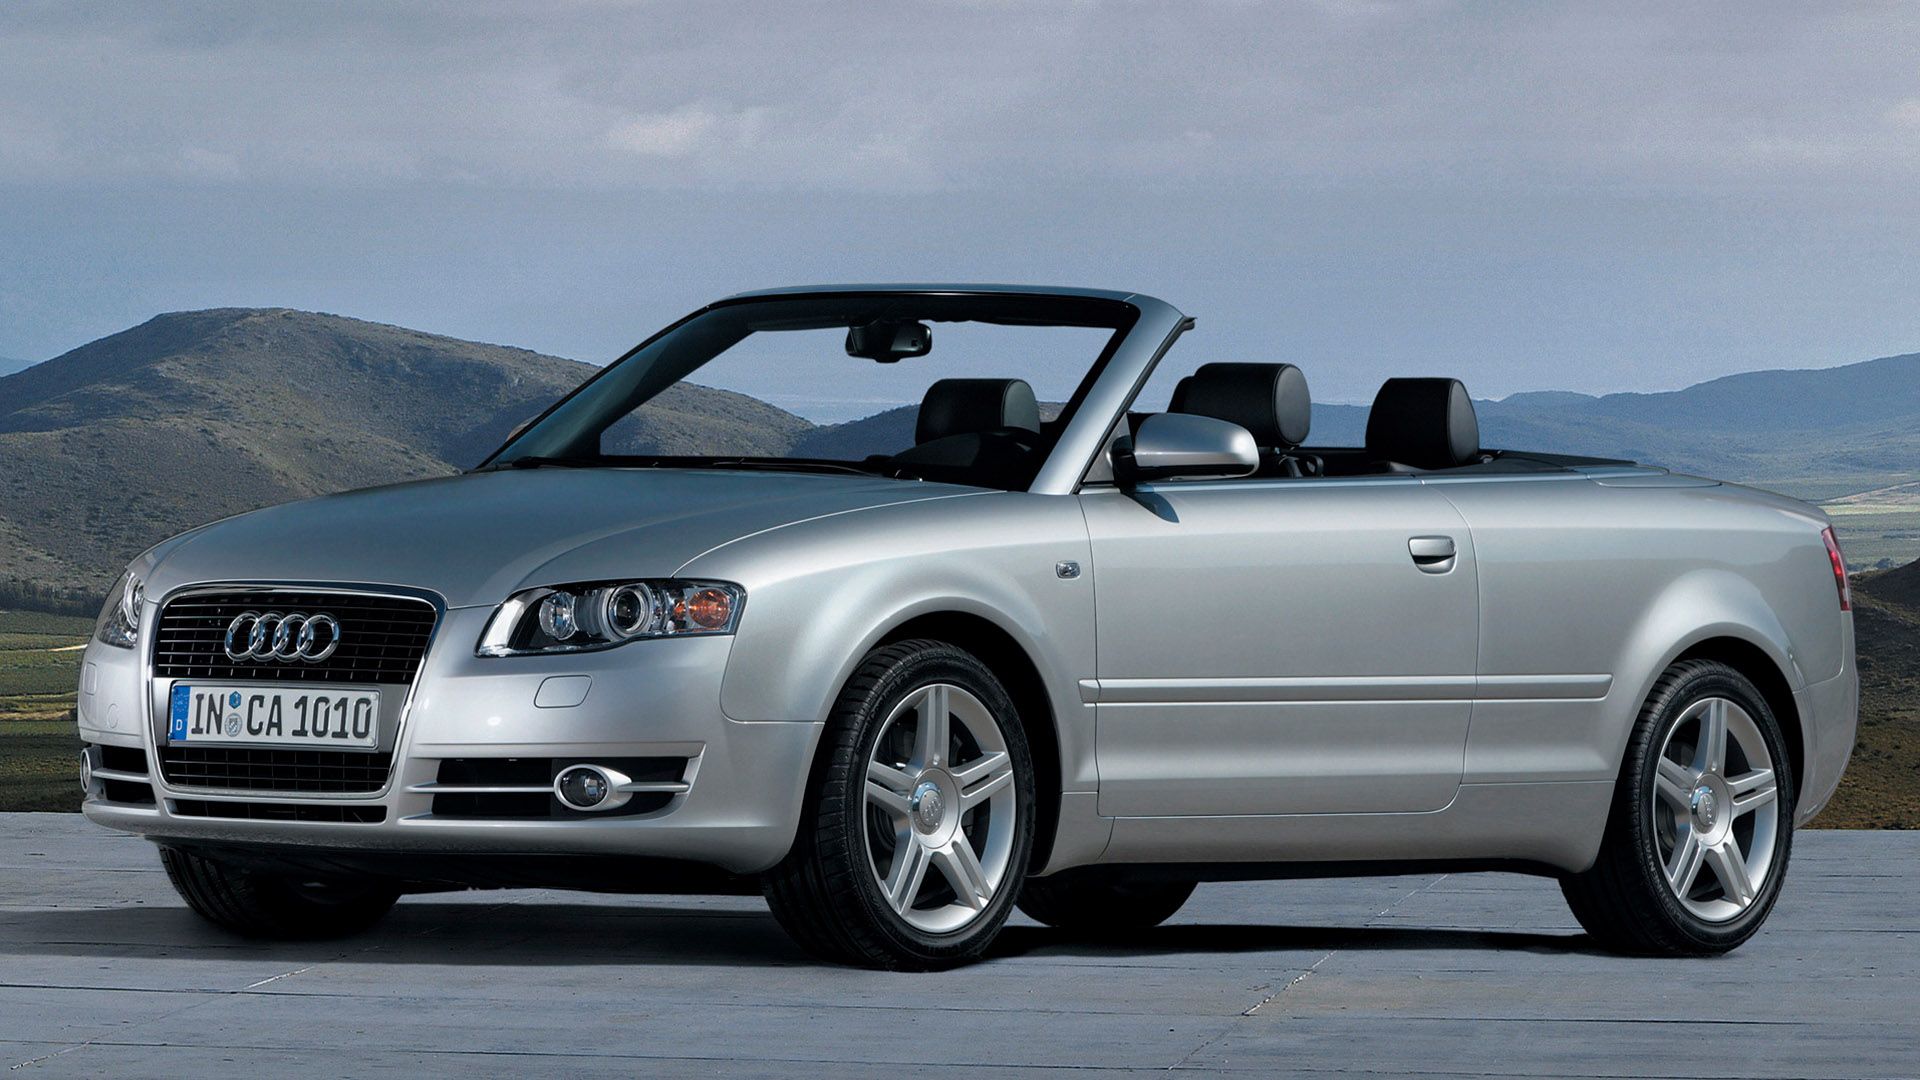 Silver Audi A4 convertible with open top, in the background a valley landscape and mountains